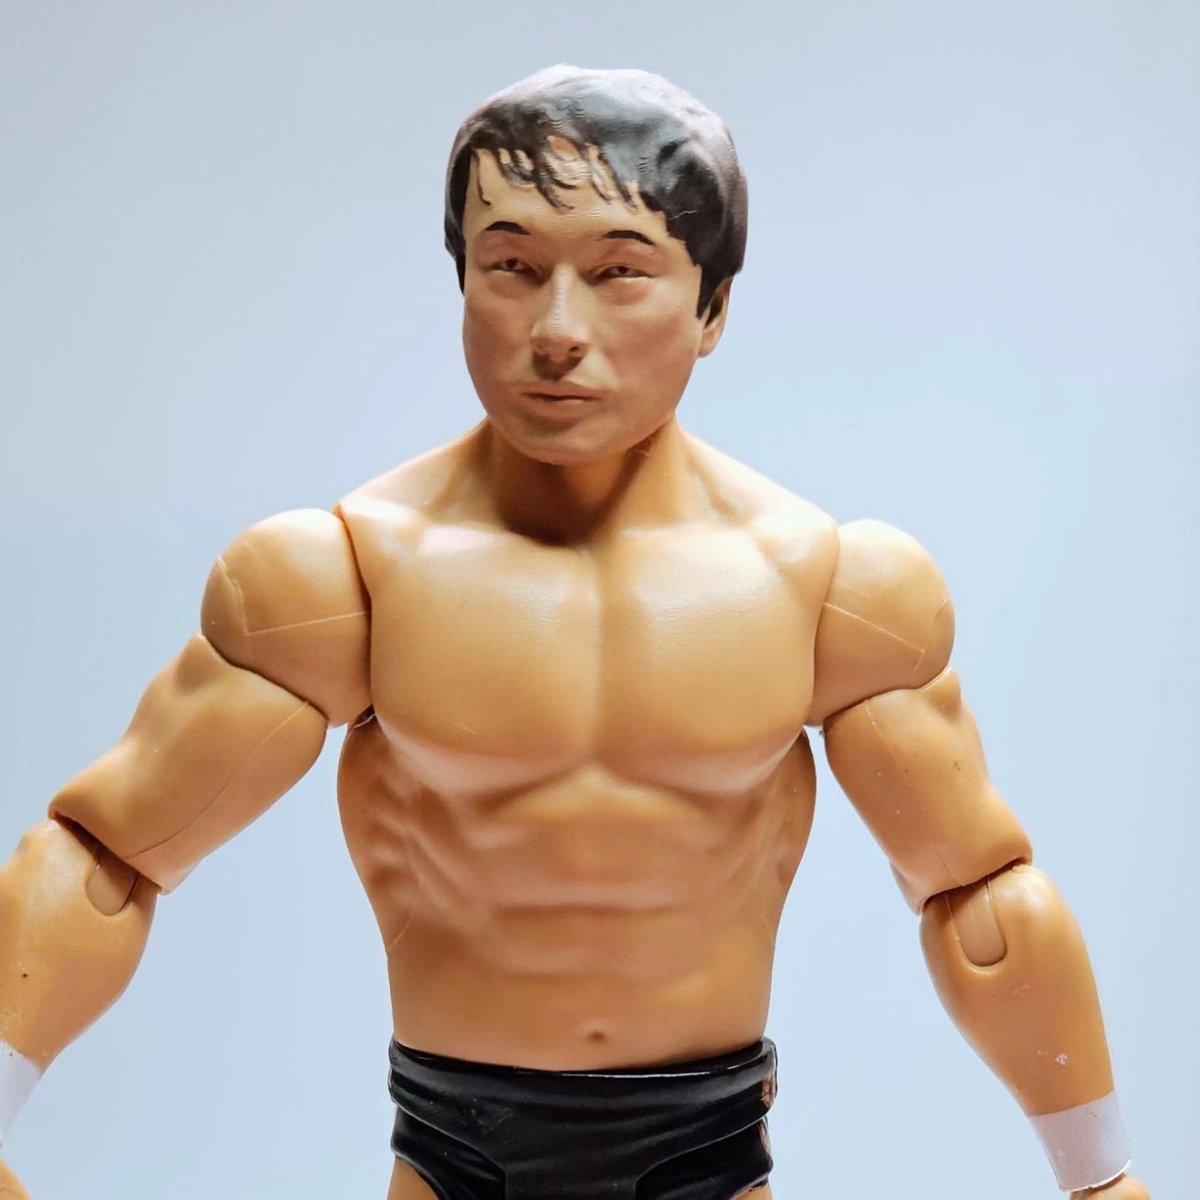 Kenta Kobashi wrestling head sculpt. All digitally sculpted, printed, and hand painted by me. 

The first of the legendary four pillars to be available for sale. 

Perfect for making your own customs.

Message me if interested and for more details 

#wrestlingfigures #wwe #AEW